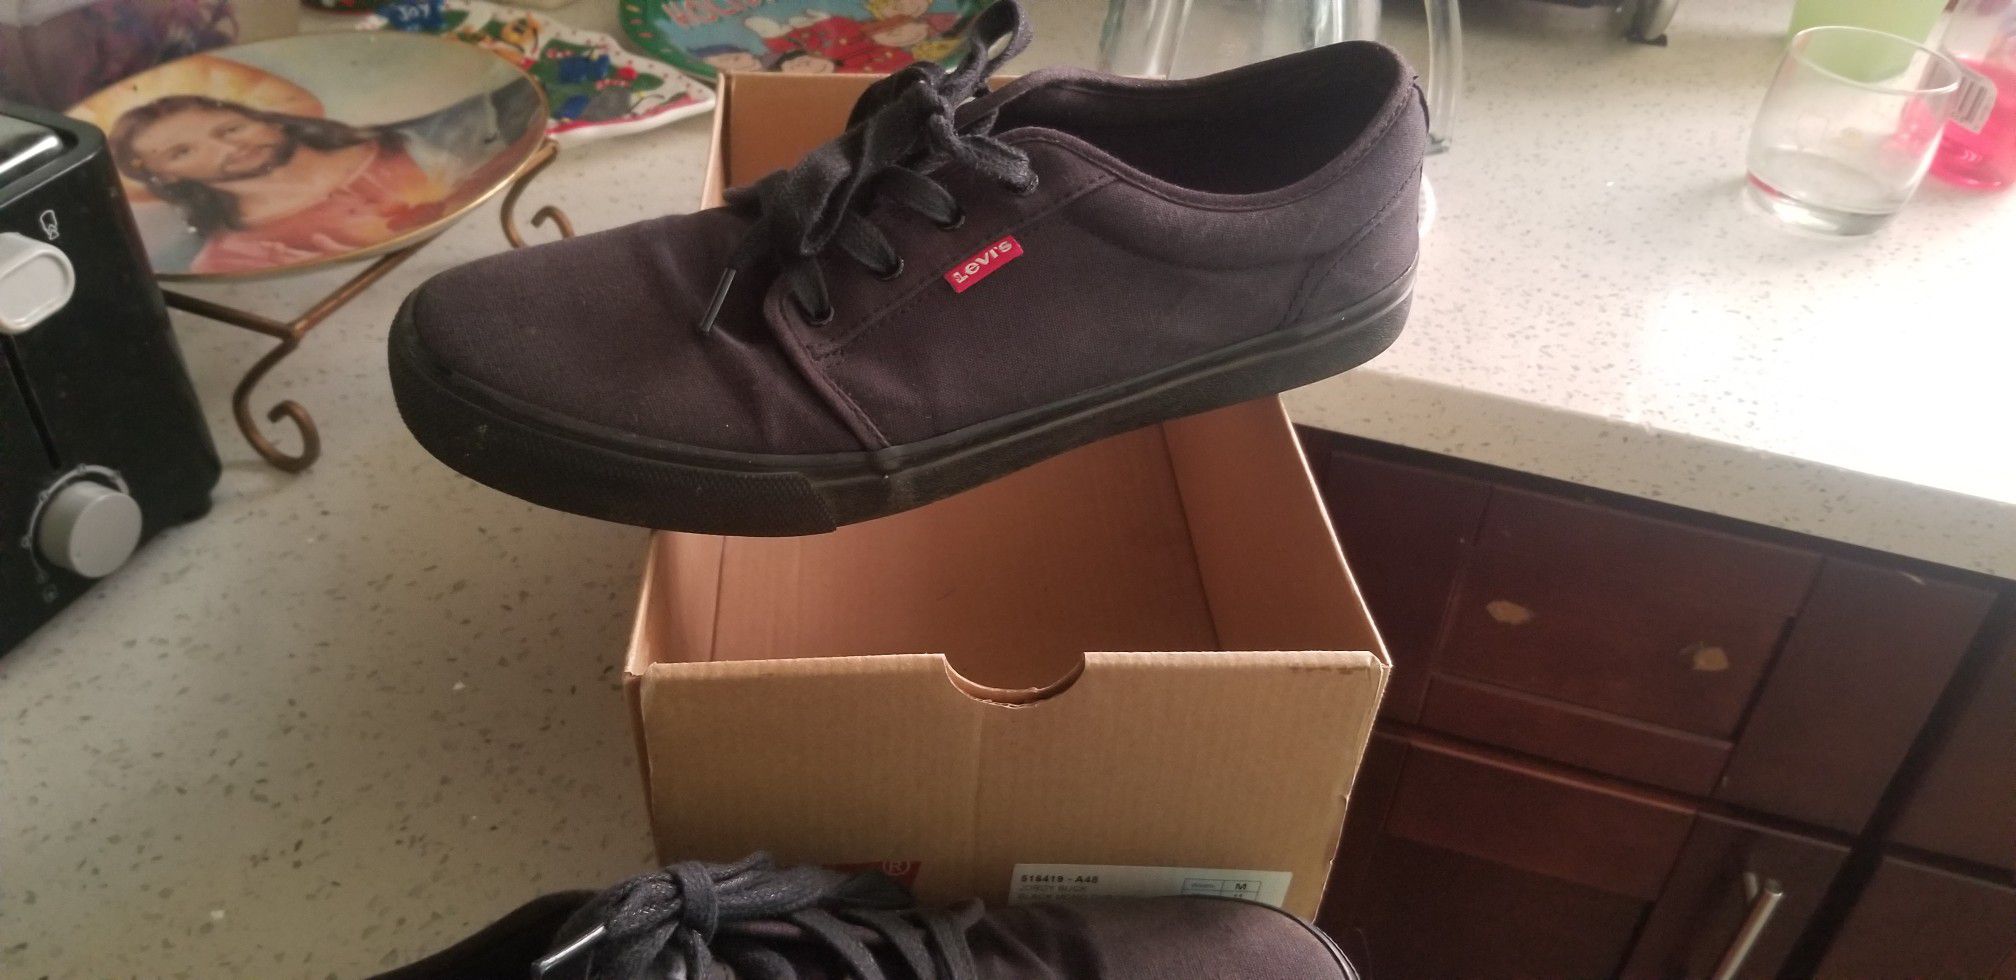 Levis show like new size 11